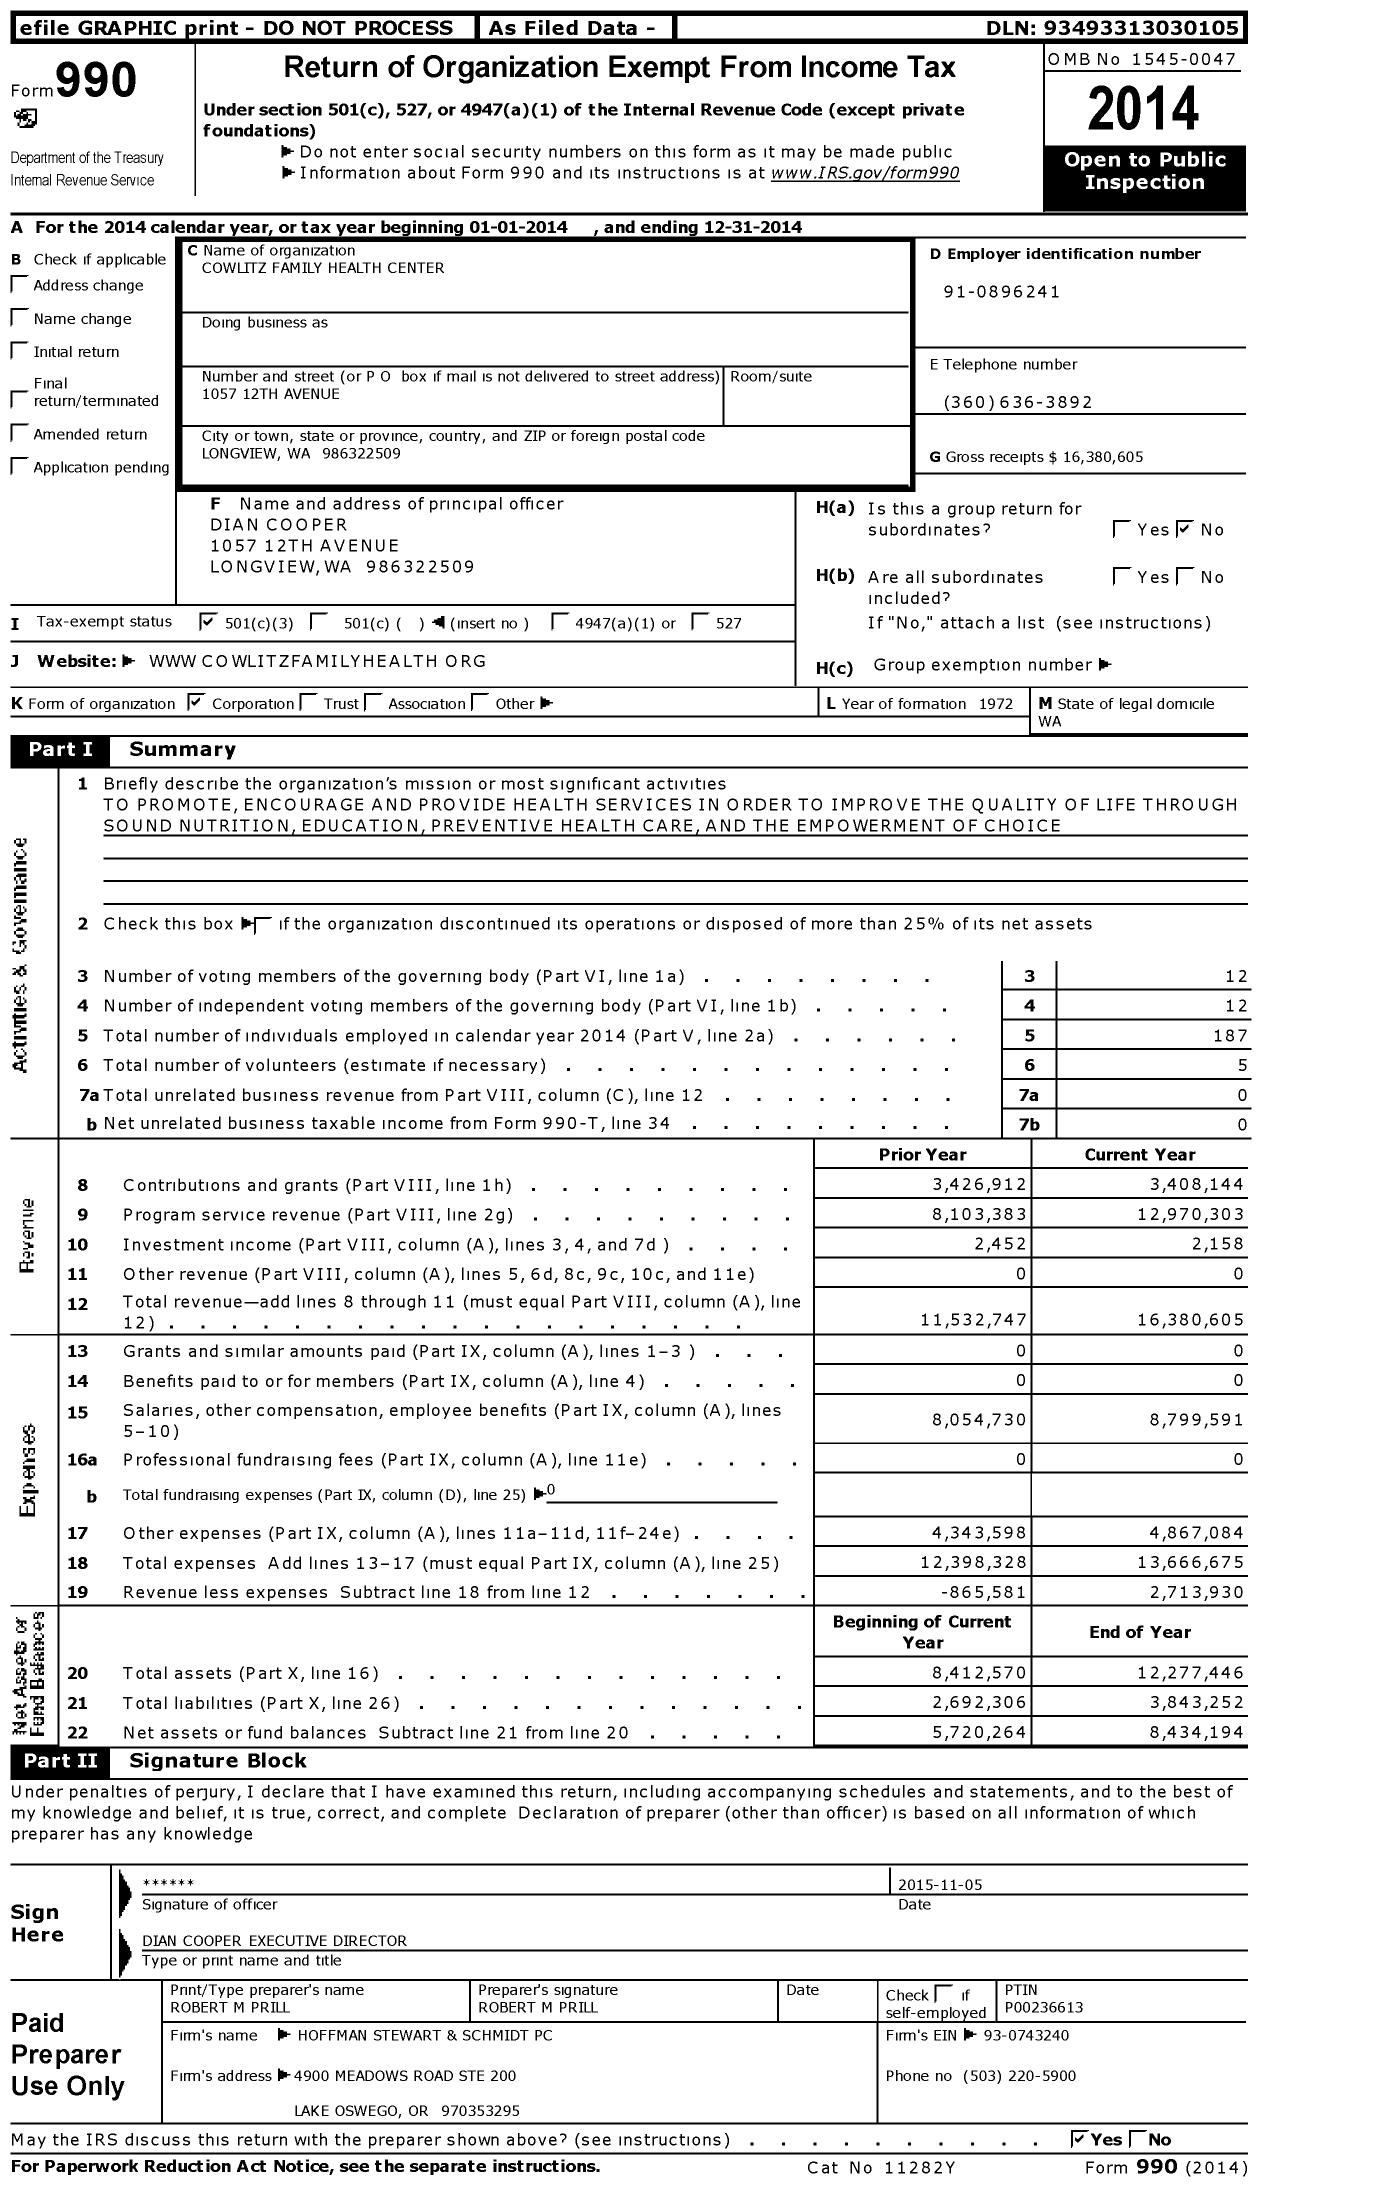 Image of first page of 2014 Form 990 for Cowlitz Family Health Center